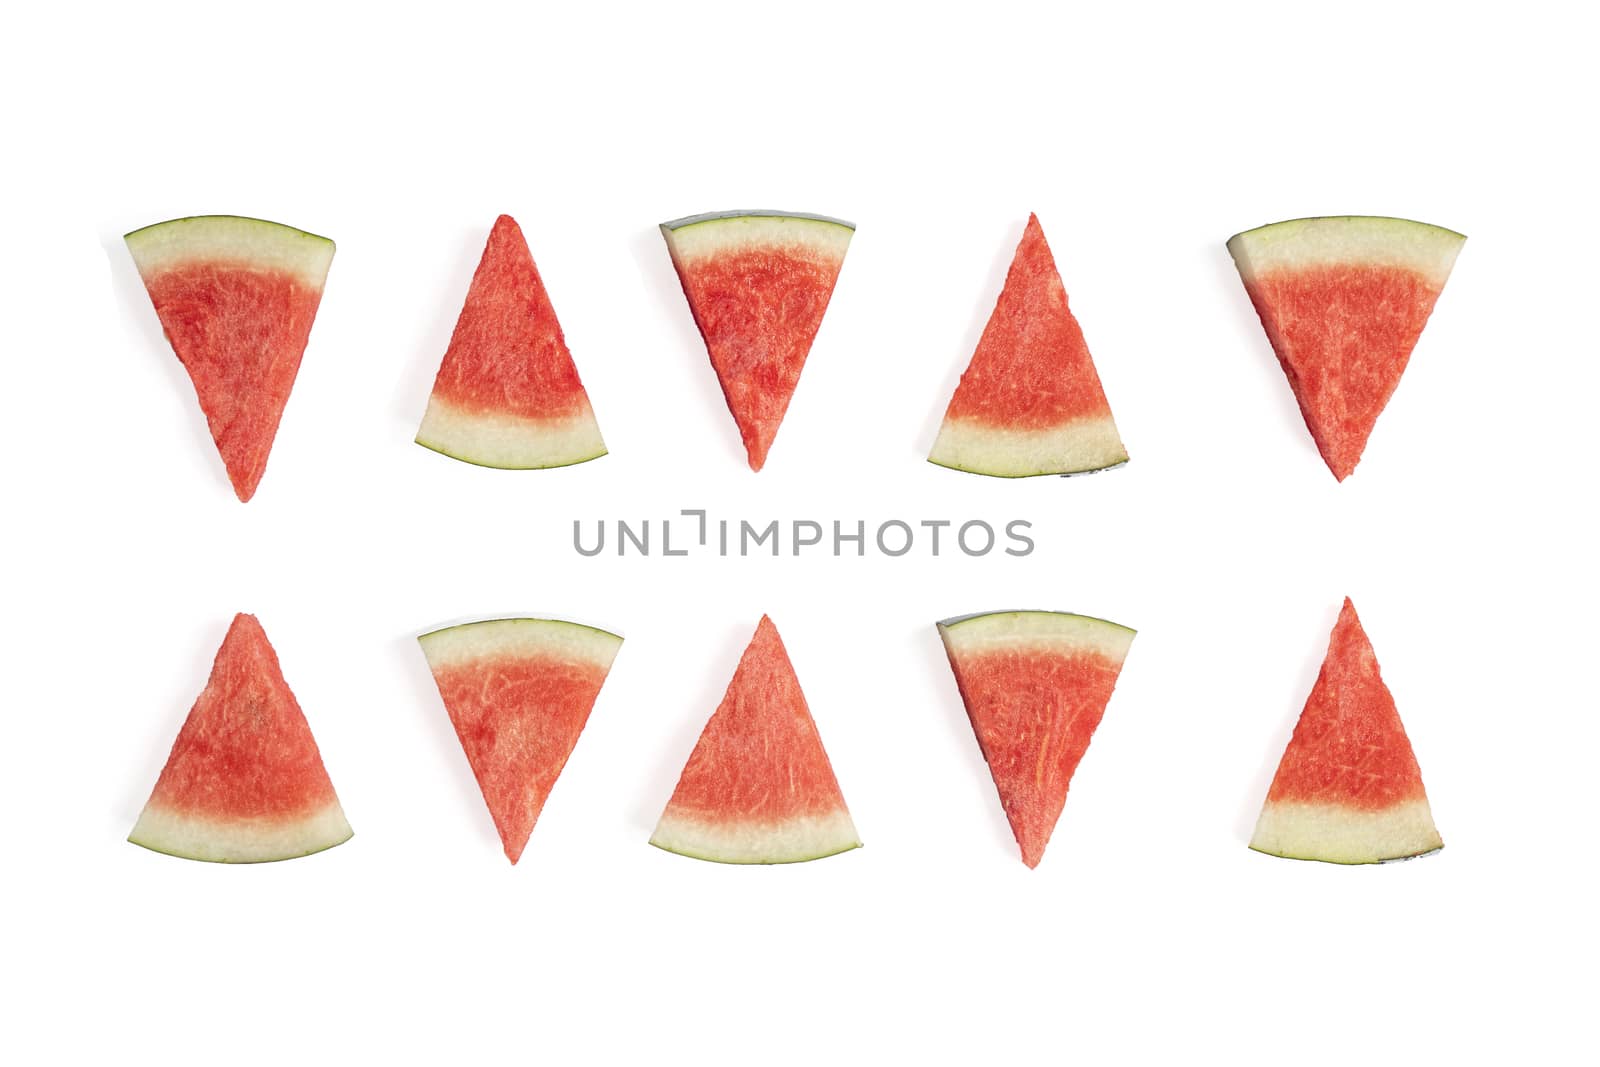 Water melon slices by Nawoot